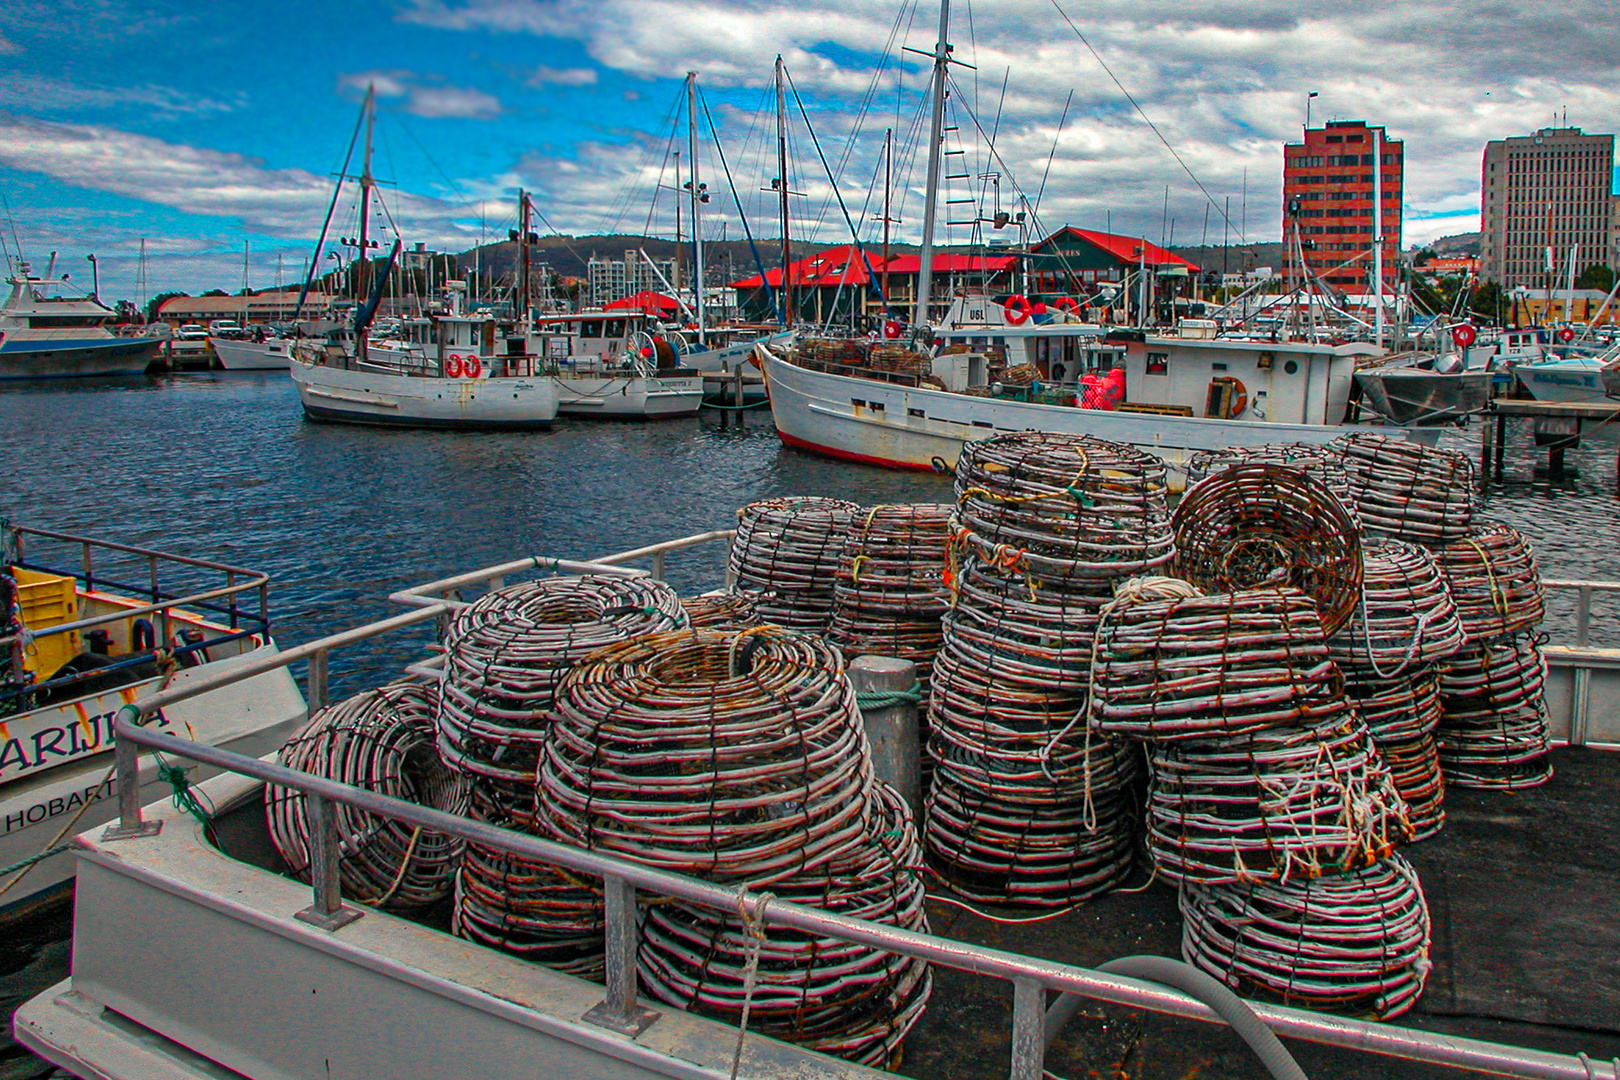 At the dock in Hobart's harbour